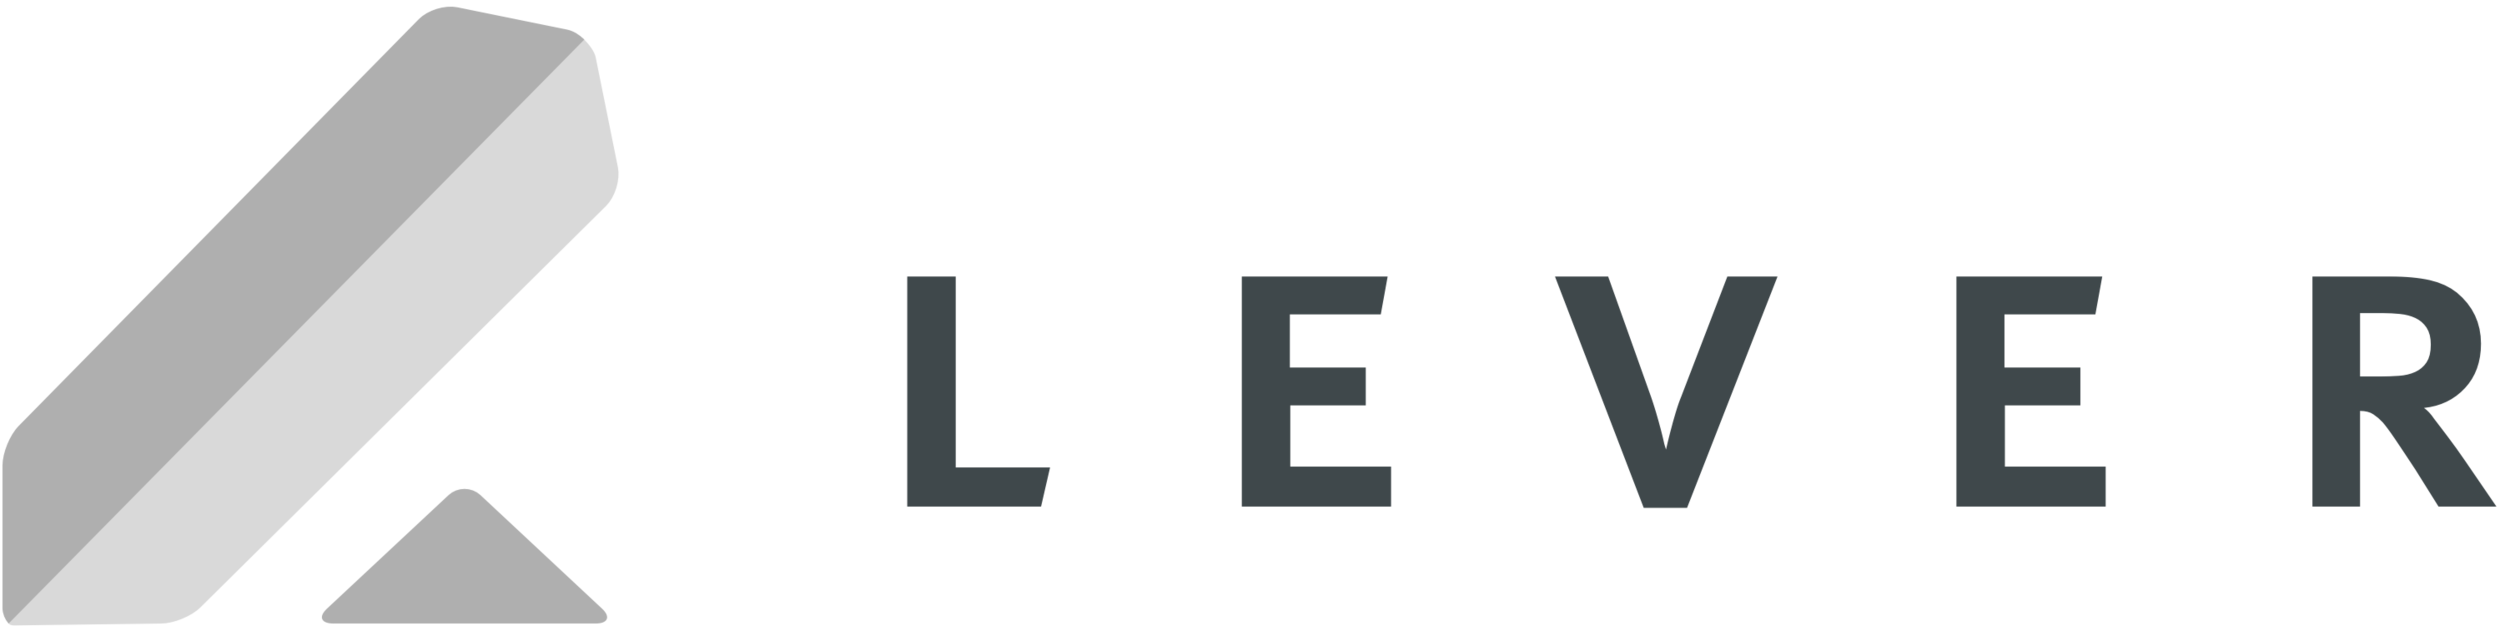 lever-logo.png